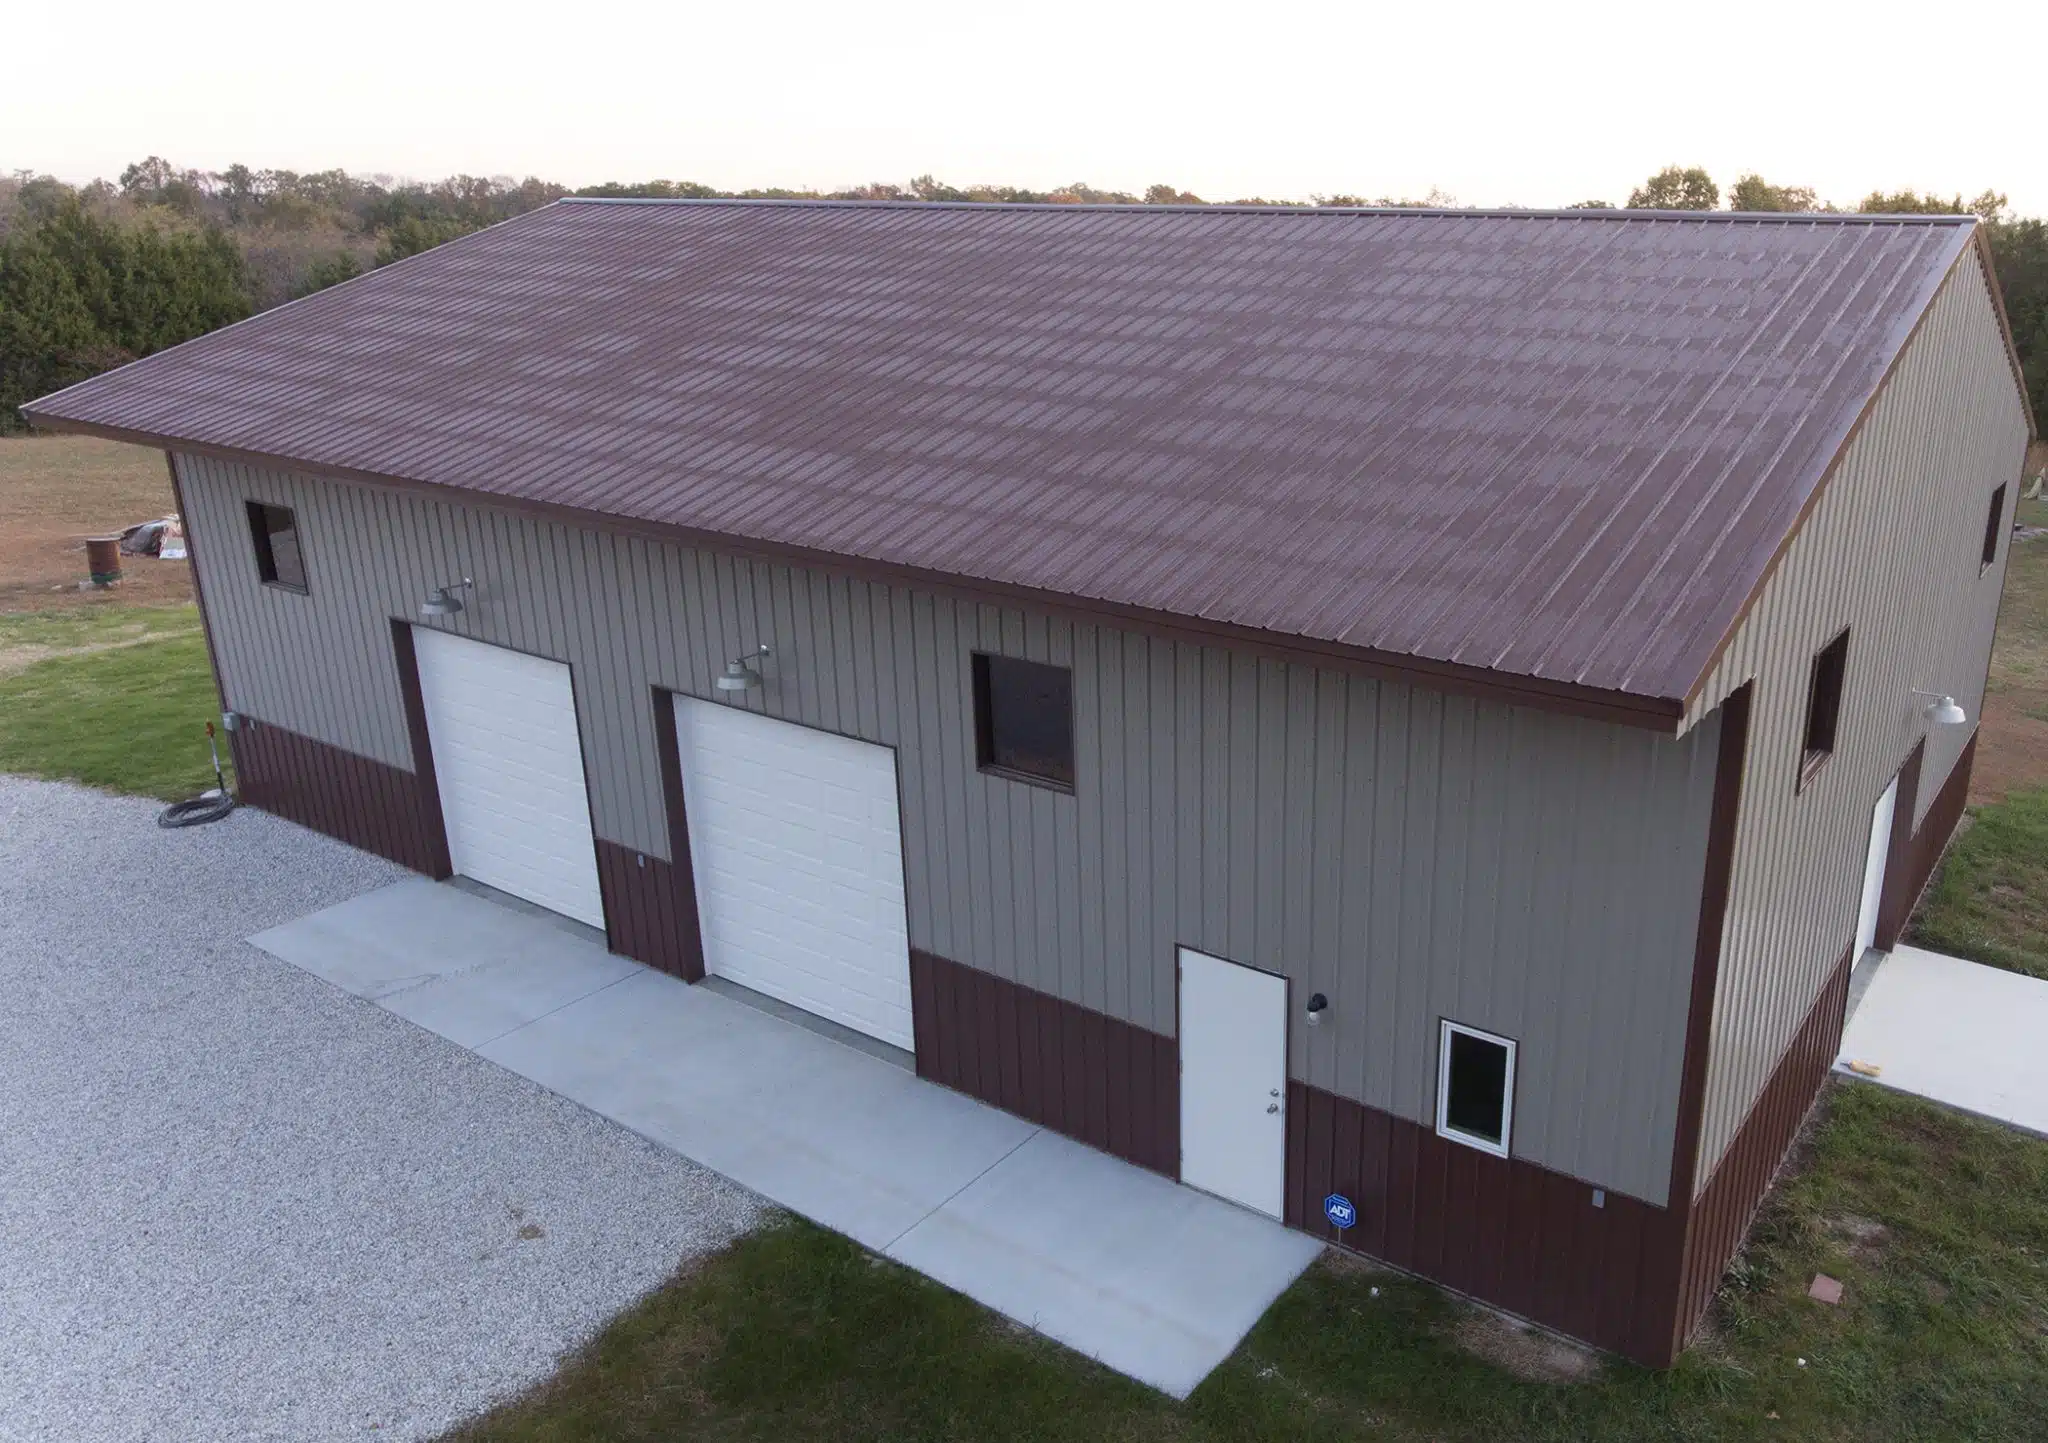 Farm Building with Panel-Loc Plus Metal Panels, Walls in Taupe, Roof in Brown